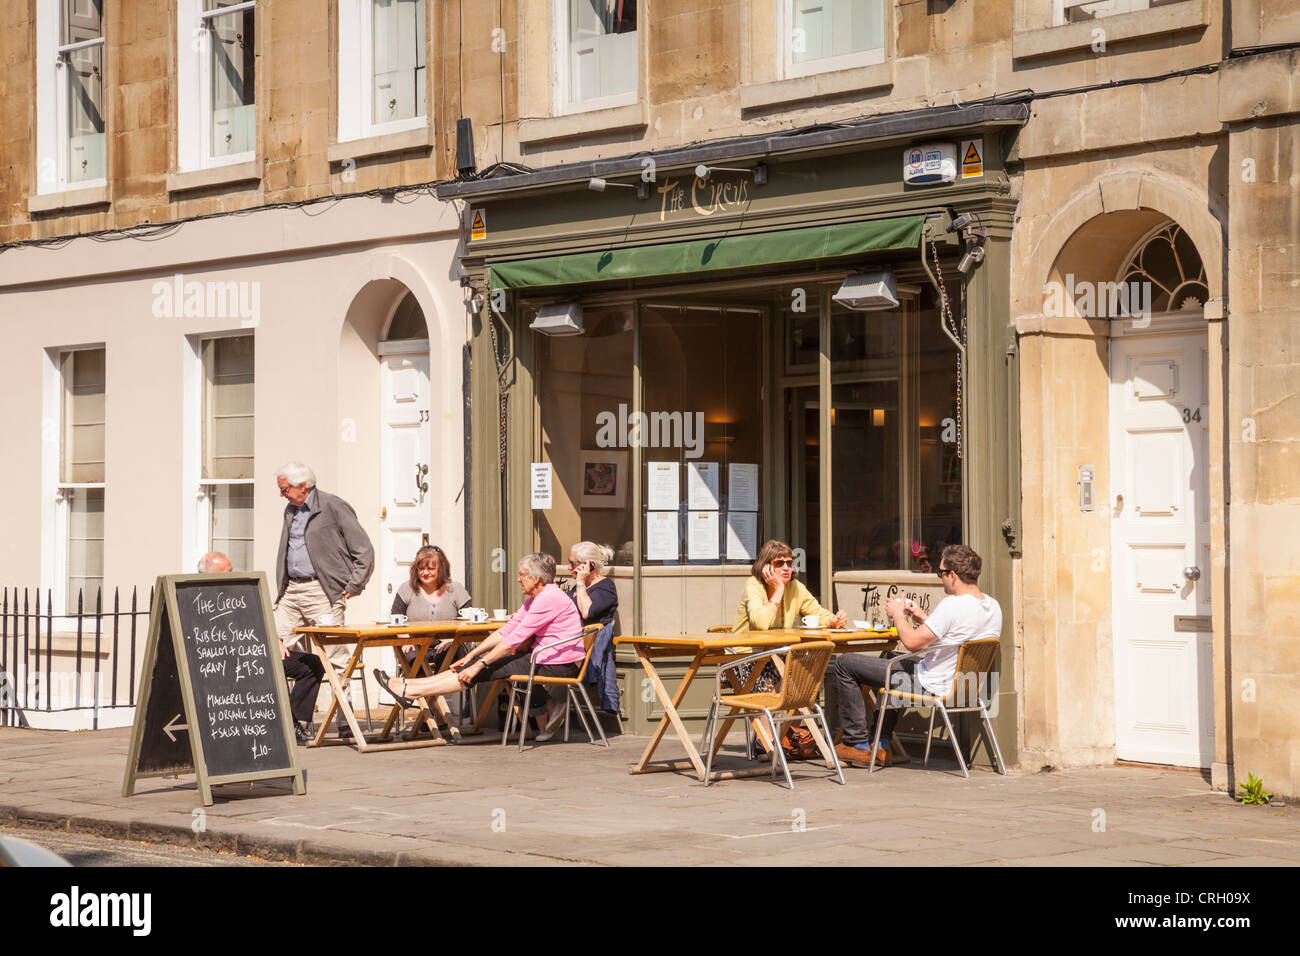 A pavement cafe near the Circus, Bath, with people sitting outdoors on a warm spring day Stock Photo